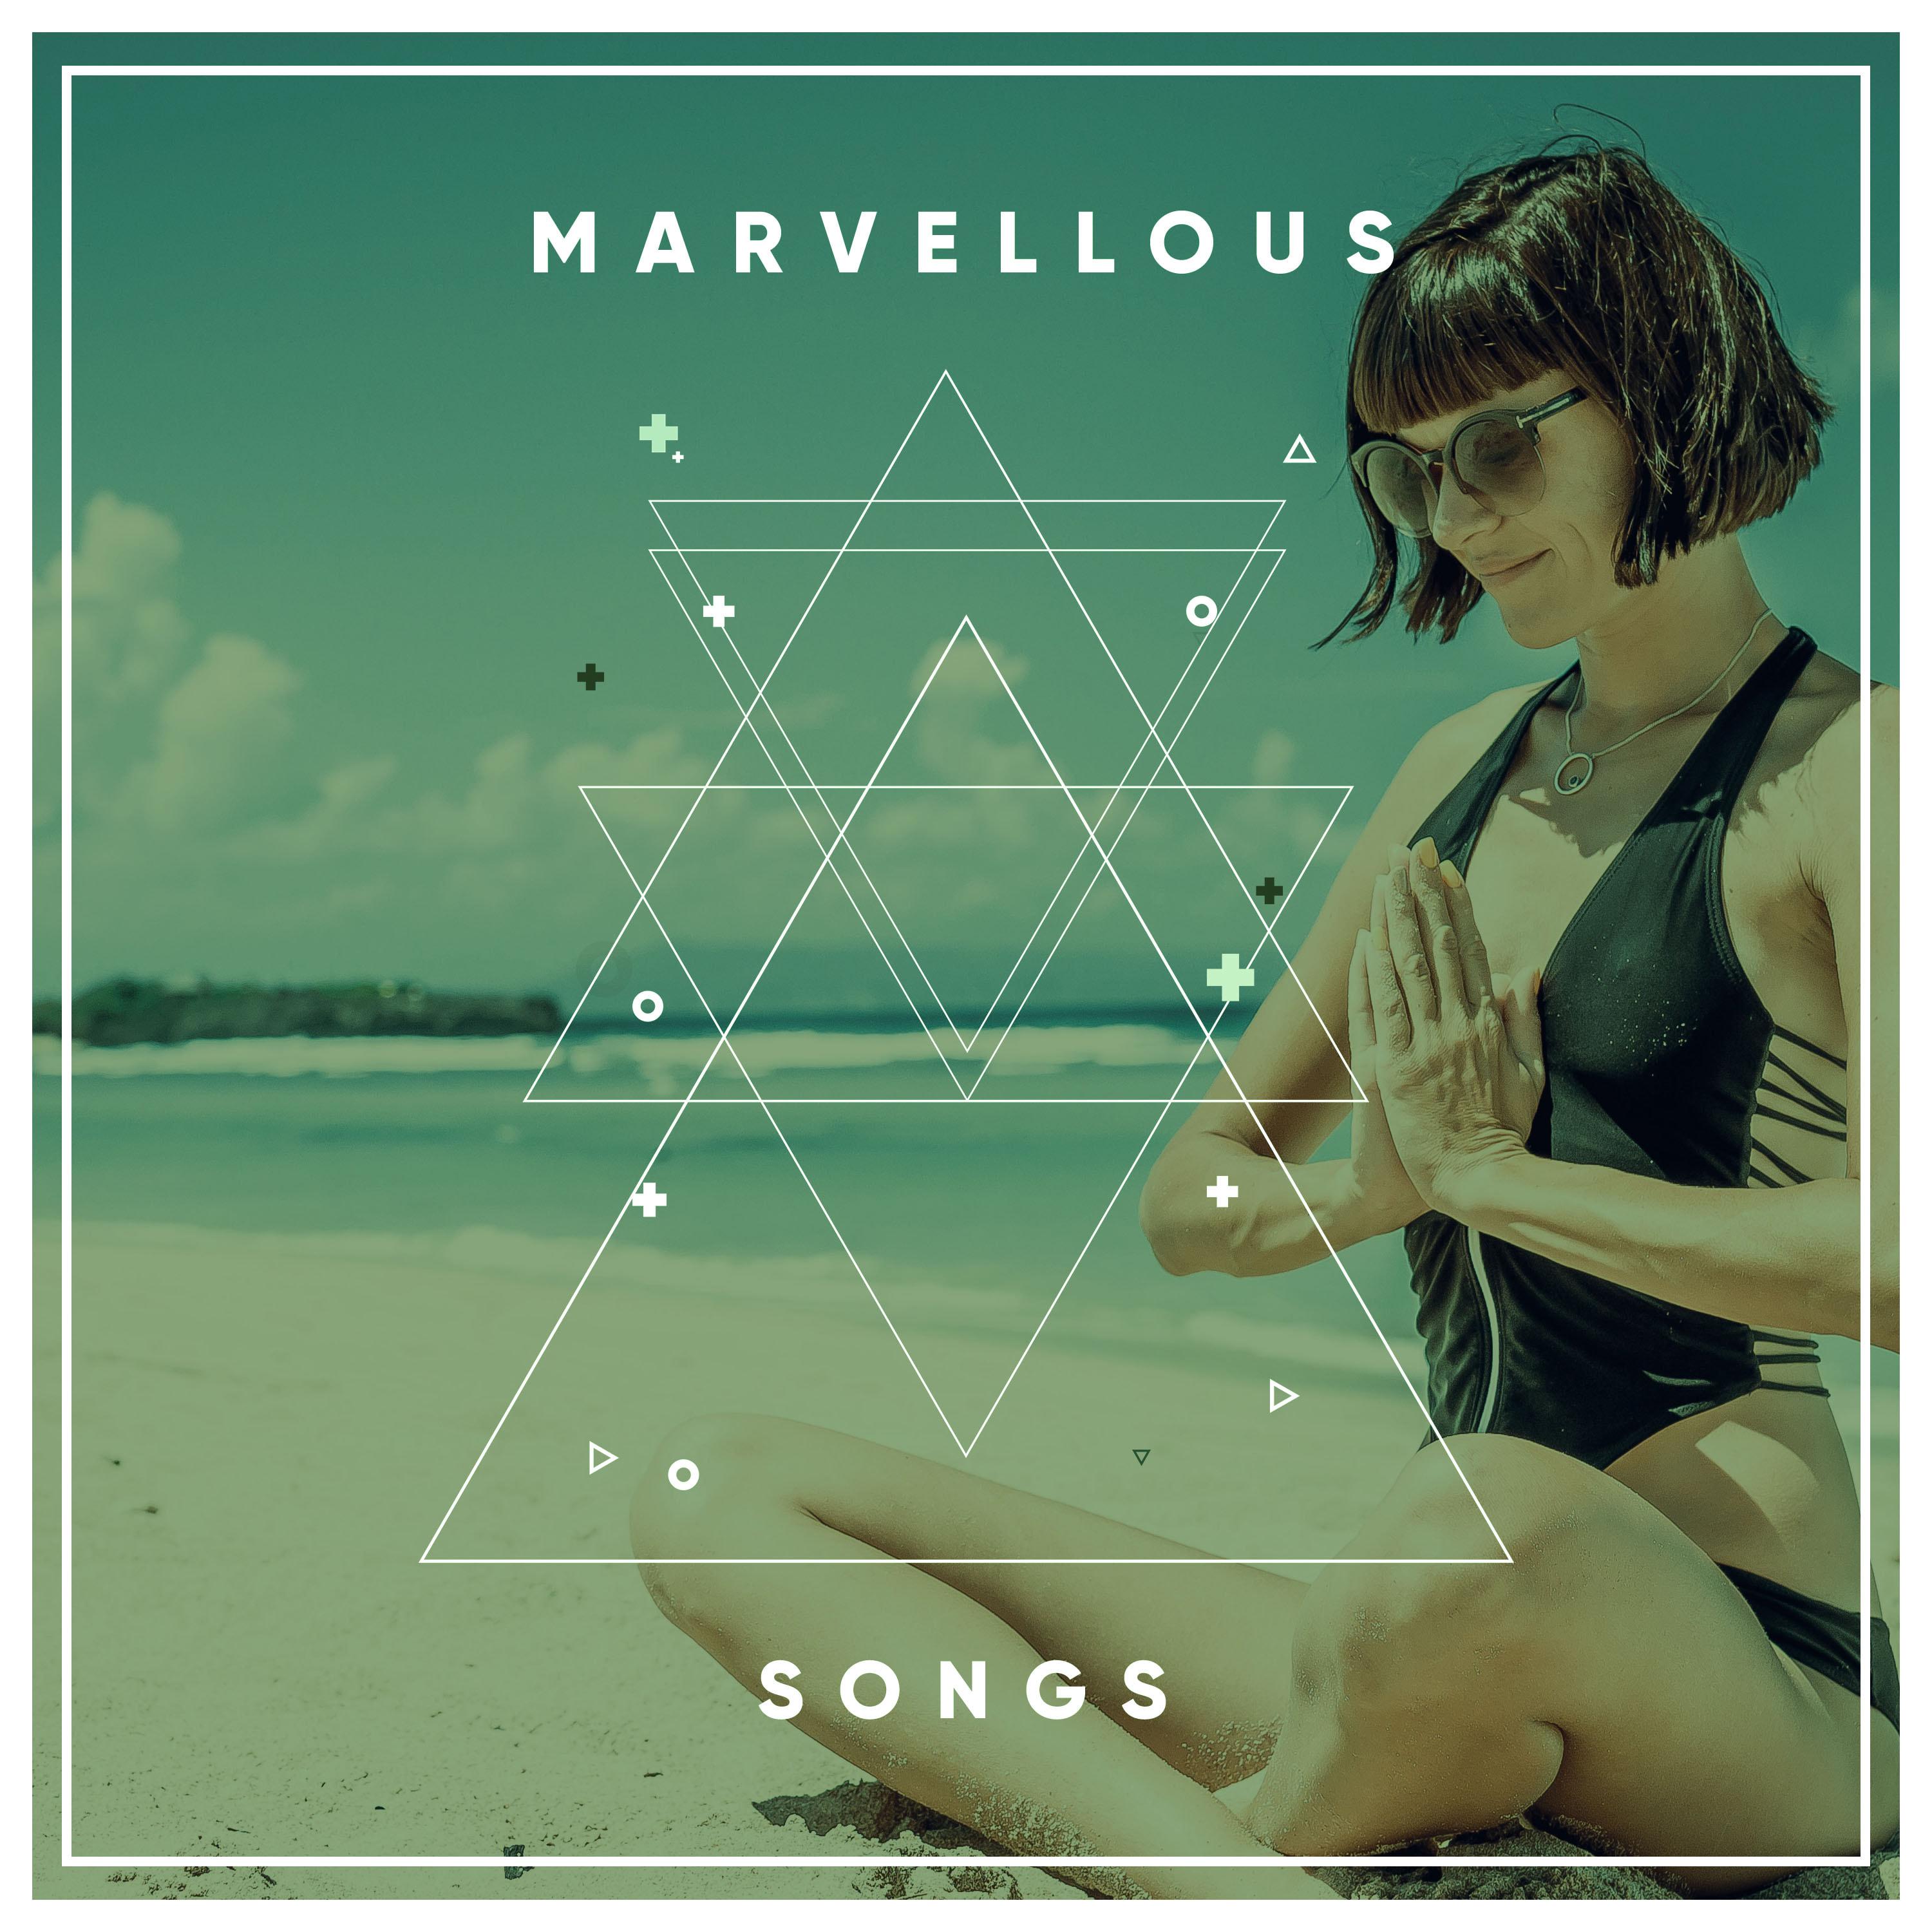 #19 Marvellous Songs to Aid Meditation & Find Calm